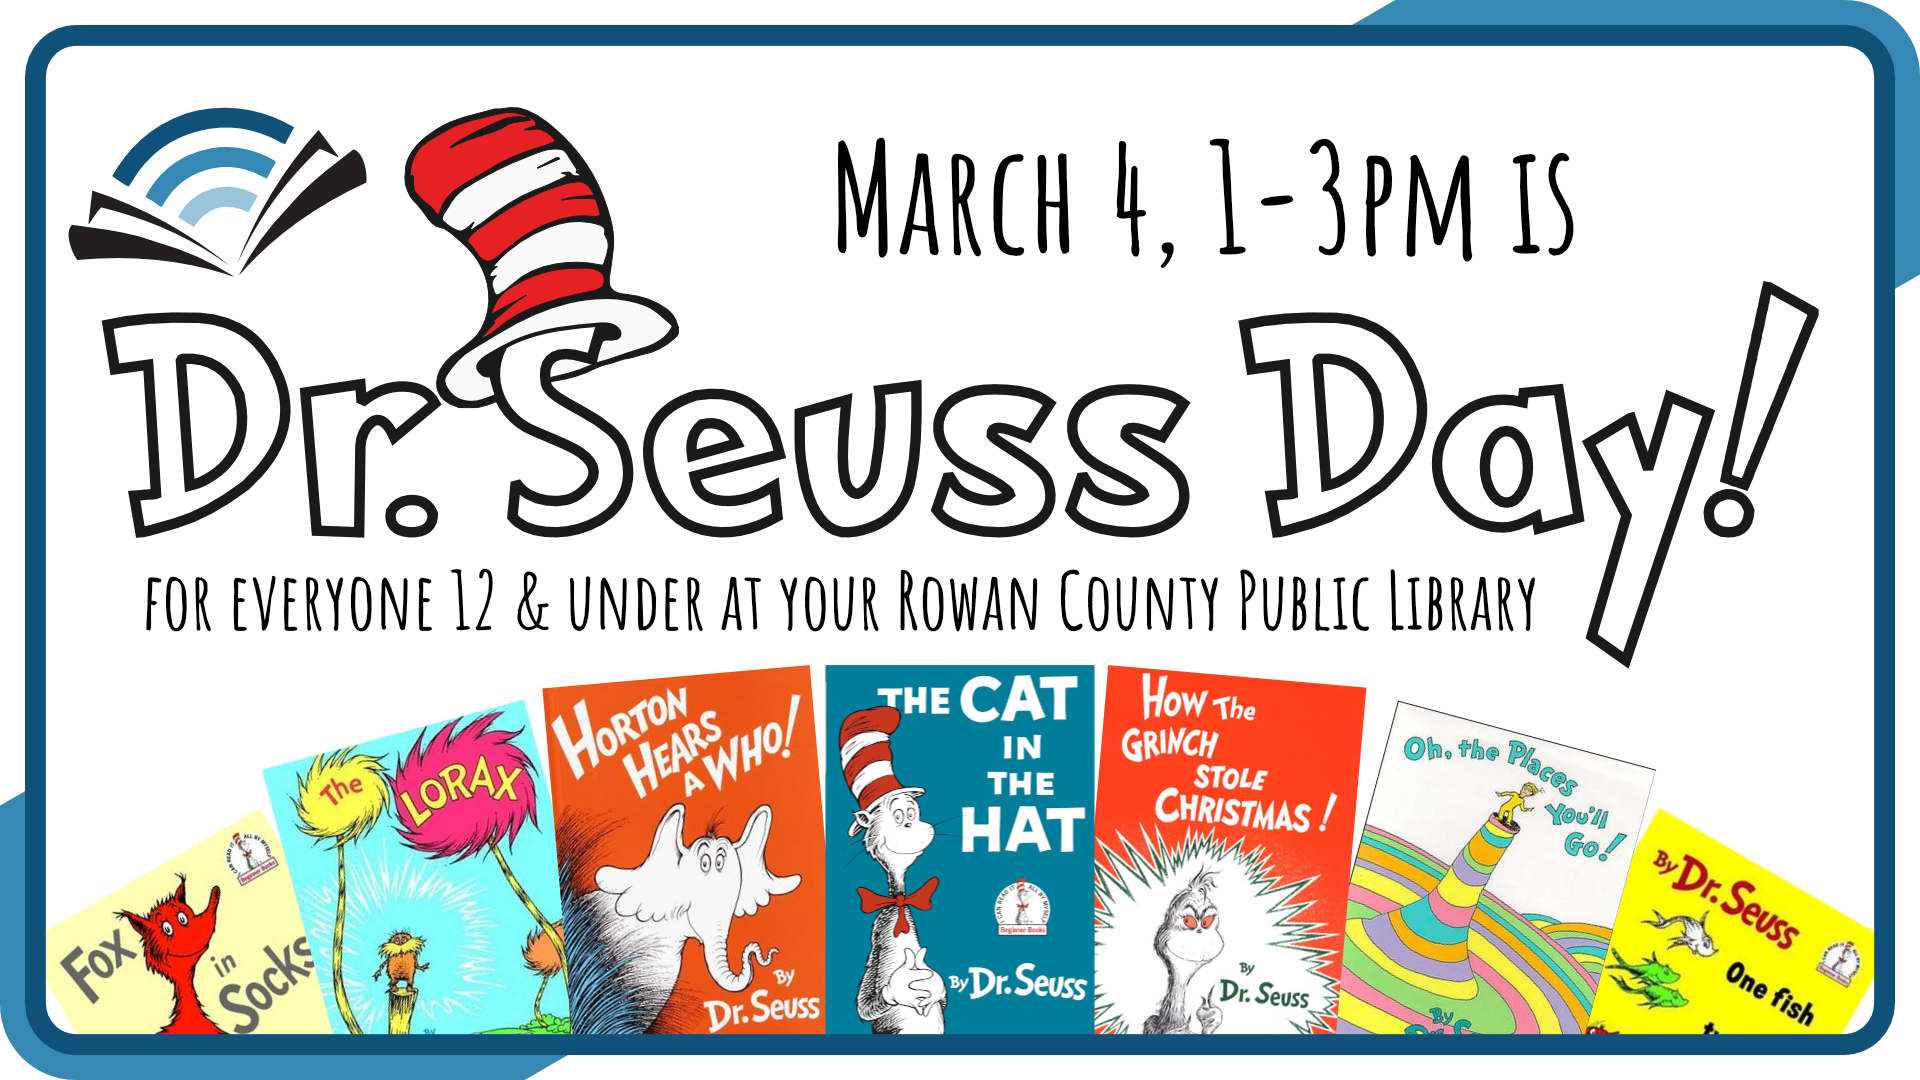 Dr. Seuss Day, March 4th from 1-3pm, intended for children 12 and under